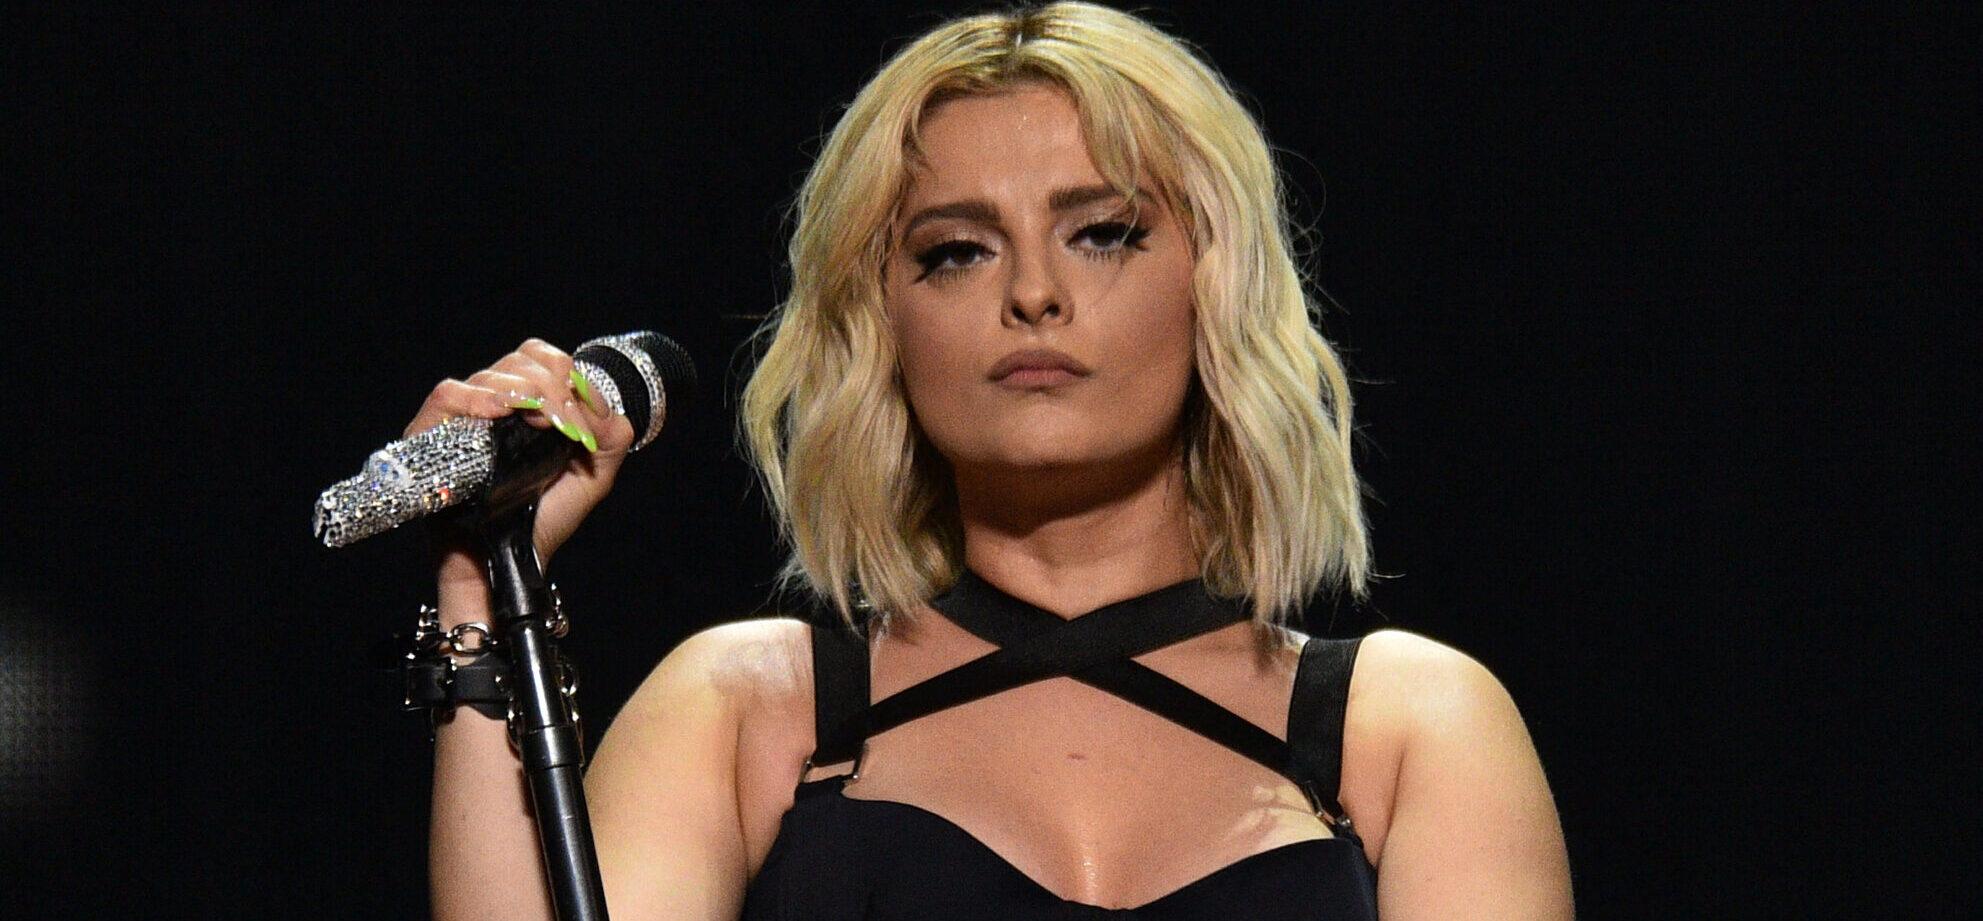 Bebe Rexha Reveals She’s ‘So Sick Of People’ Constantly Talking About Her Weight Gain: ‘I Know I Got Fat’